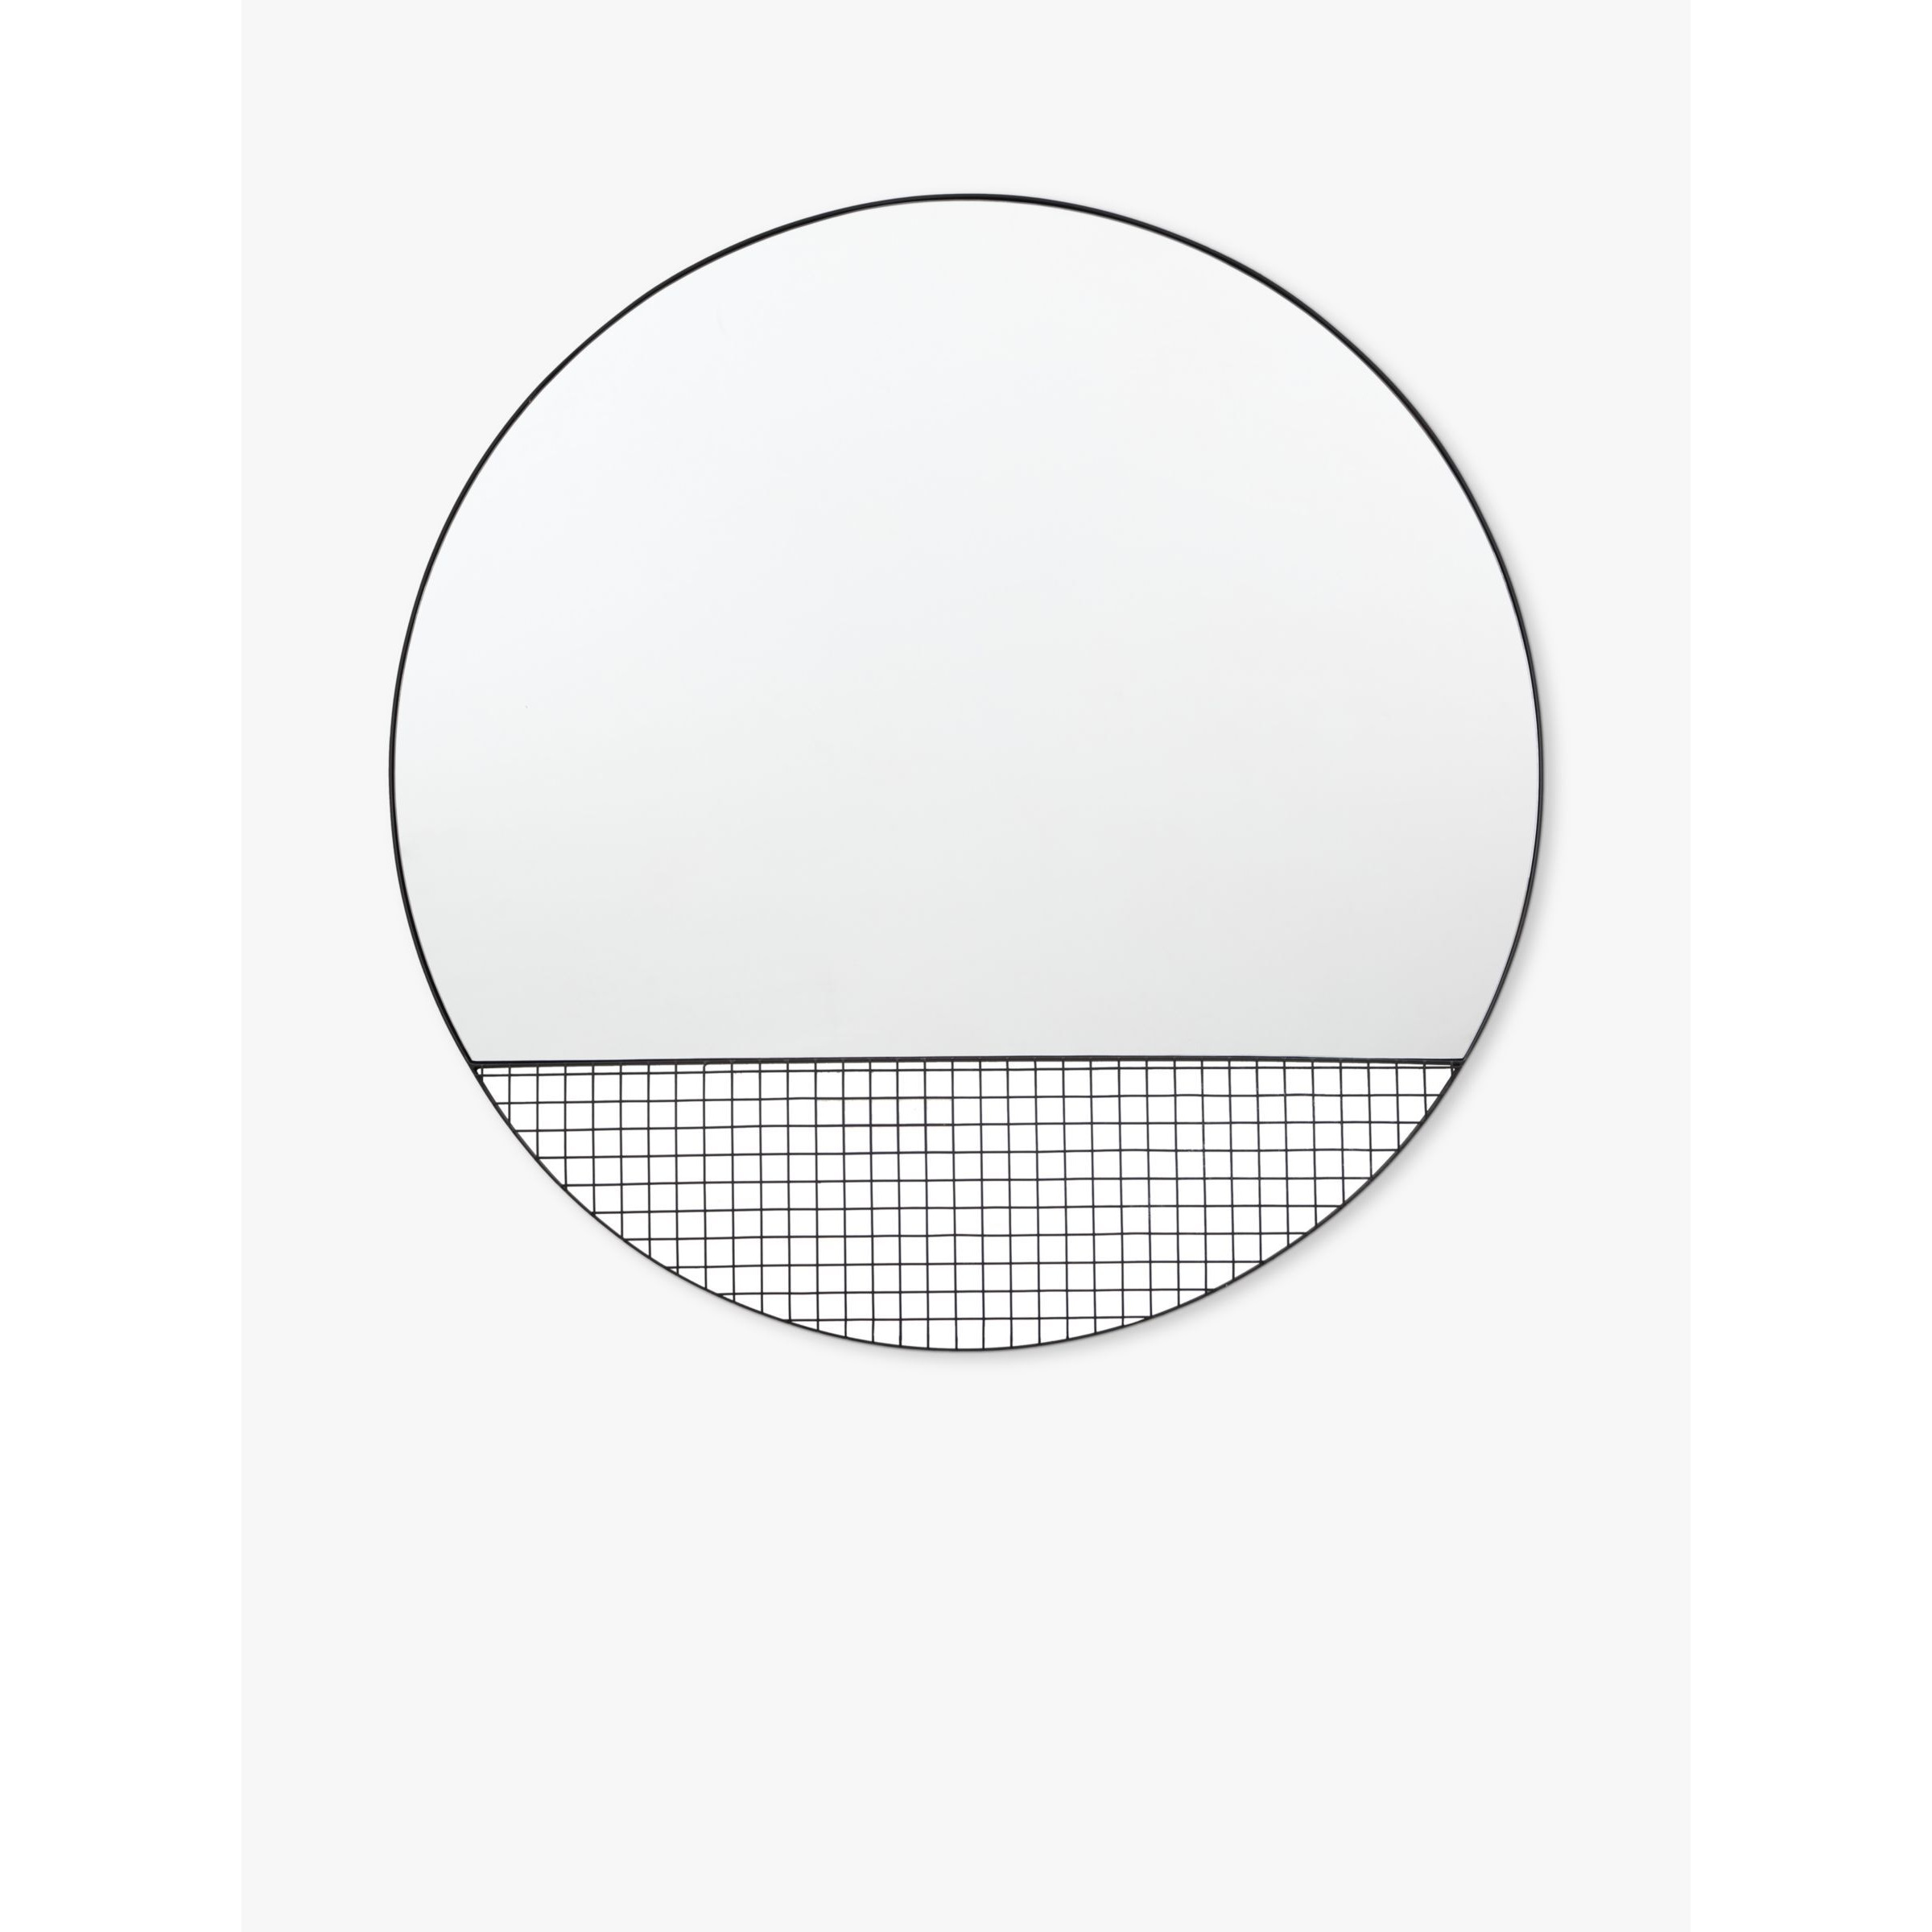 Gallery Direct Auburn Round Metal Caged Wire Wall Mirror, 80cm - image 1